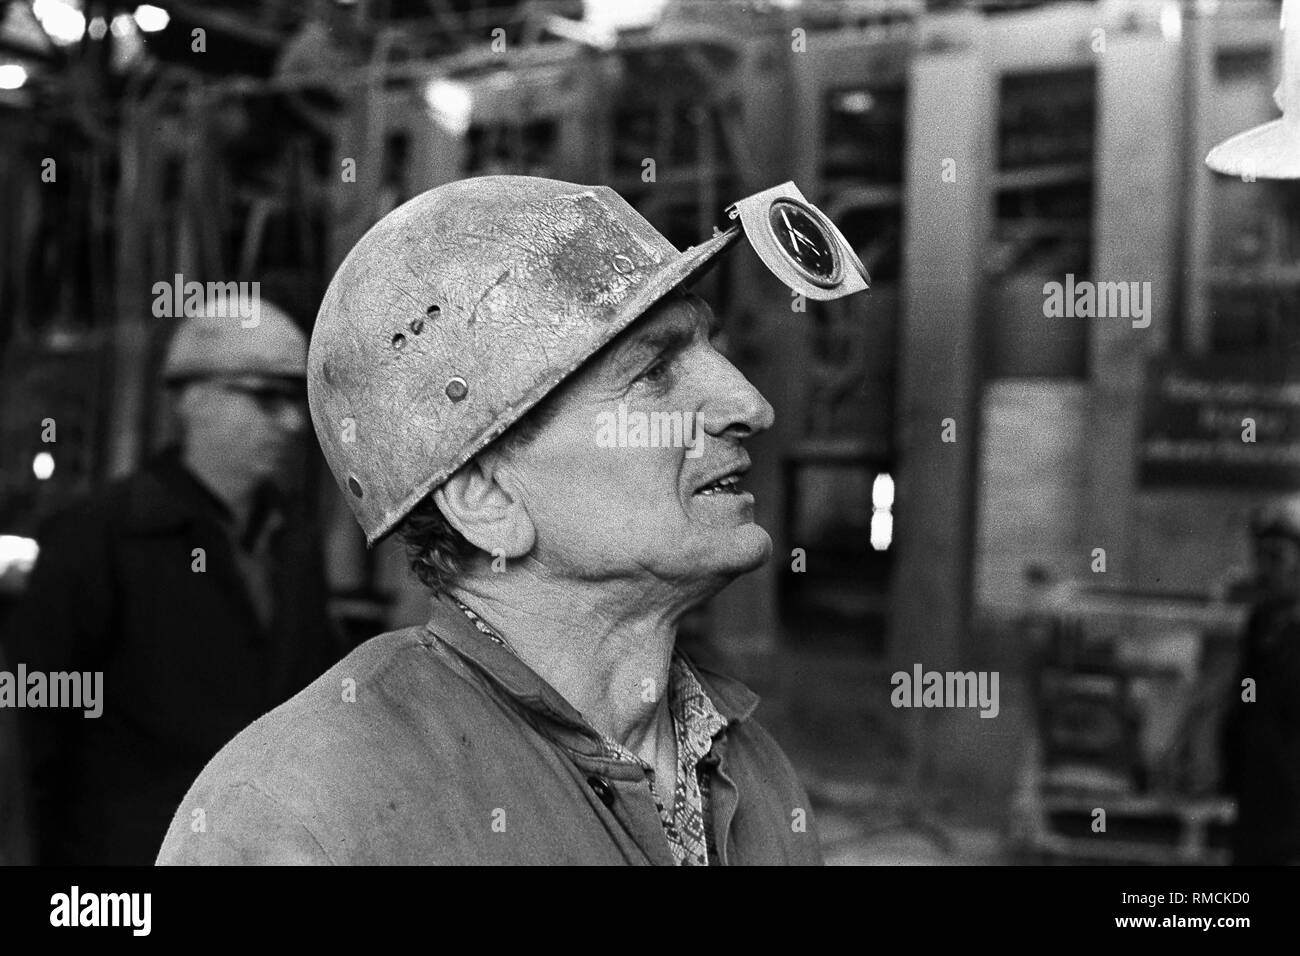 Workers at the steel plant in Riesa. Stock Photo